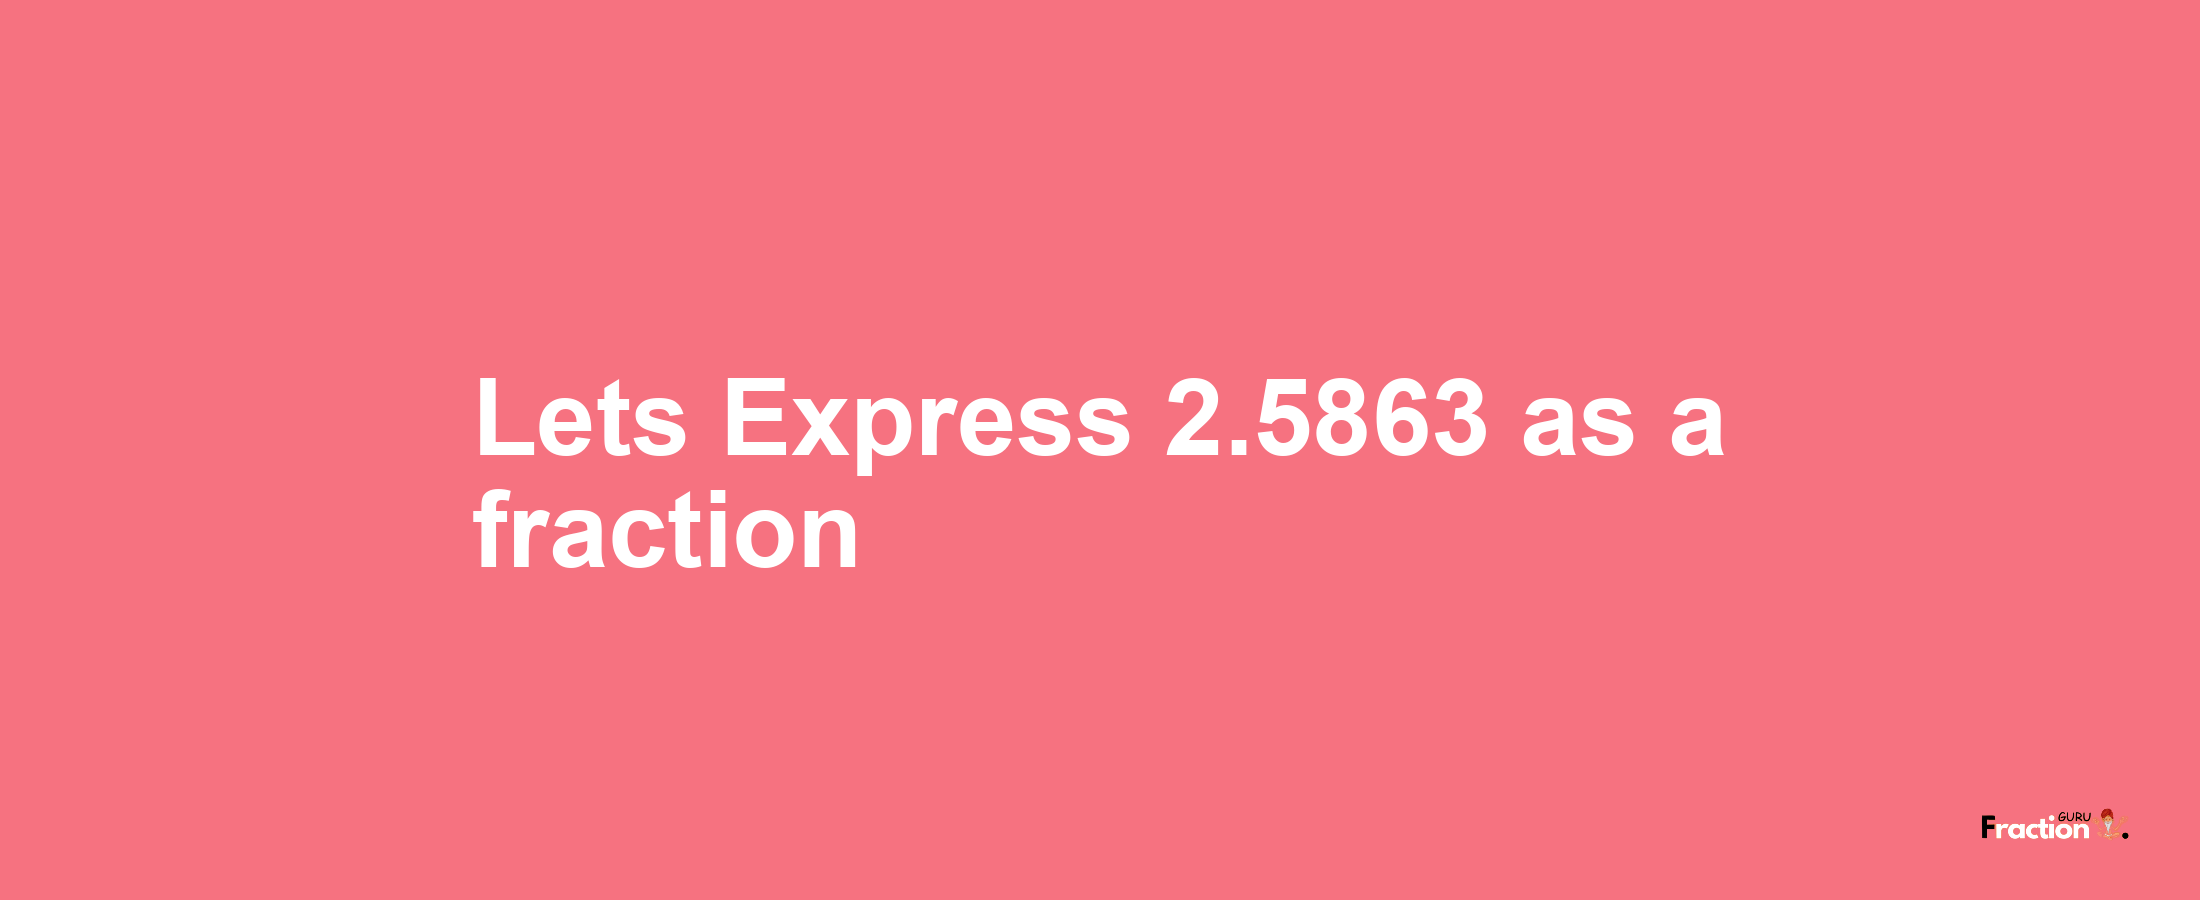 Lets Express 2.5863 as afraction